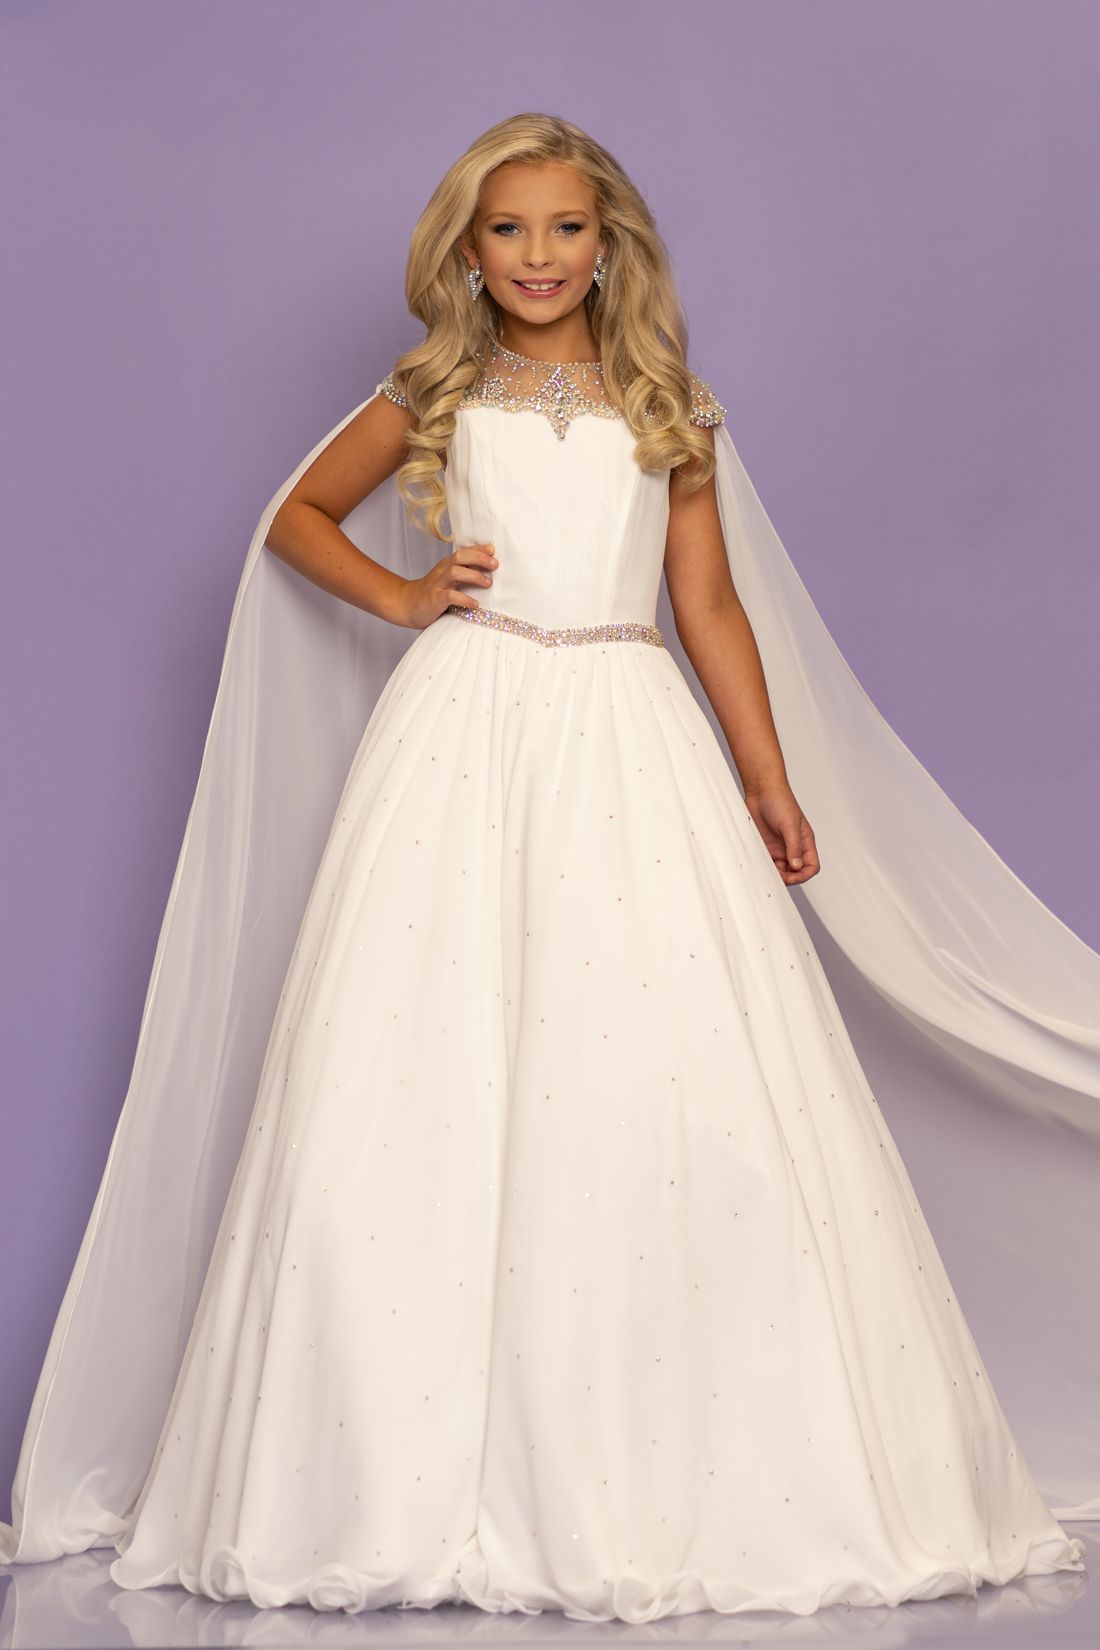 Sugar Kayne C136 by Johnathan Kayne is a girls and preteen pageant dress of flowy chiffon with a sheer embellished cap sleeve flowy chiffon cape.  This dress has an embellished waistline.   Available colors:  Neon Pink, White  Available sizes:  2, 4, 6, 8, 10, 12, 14, 16 